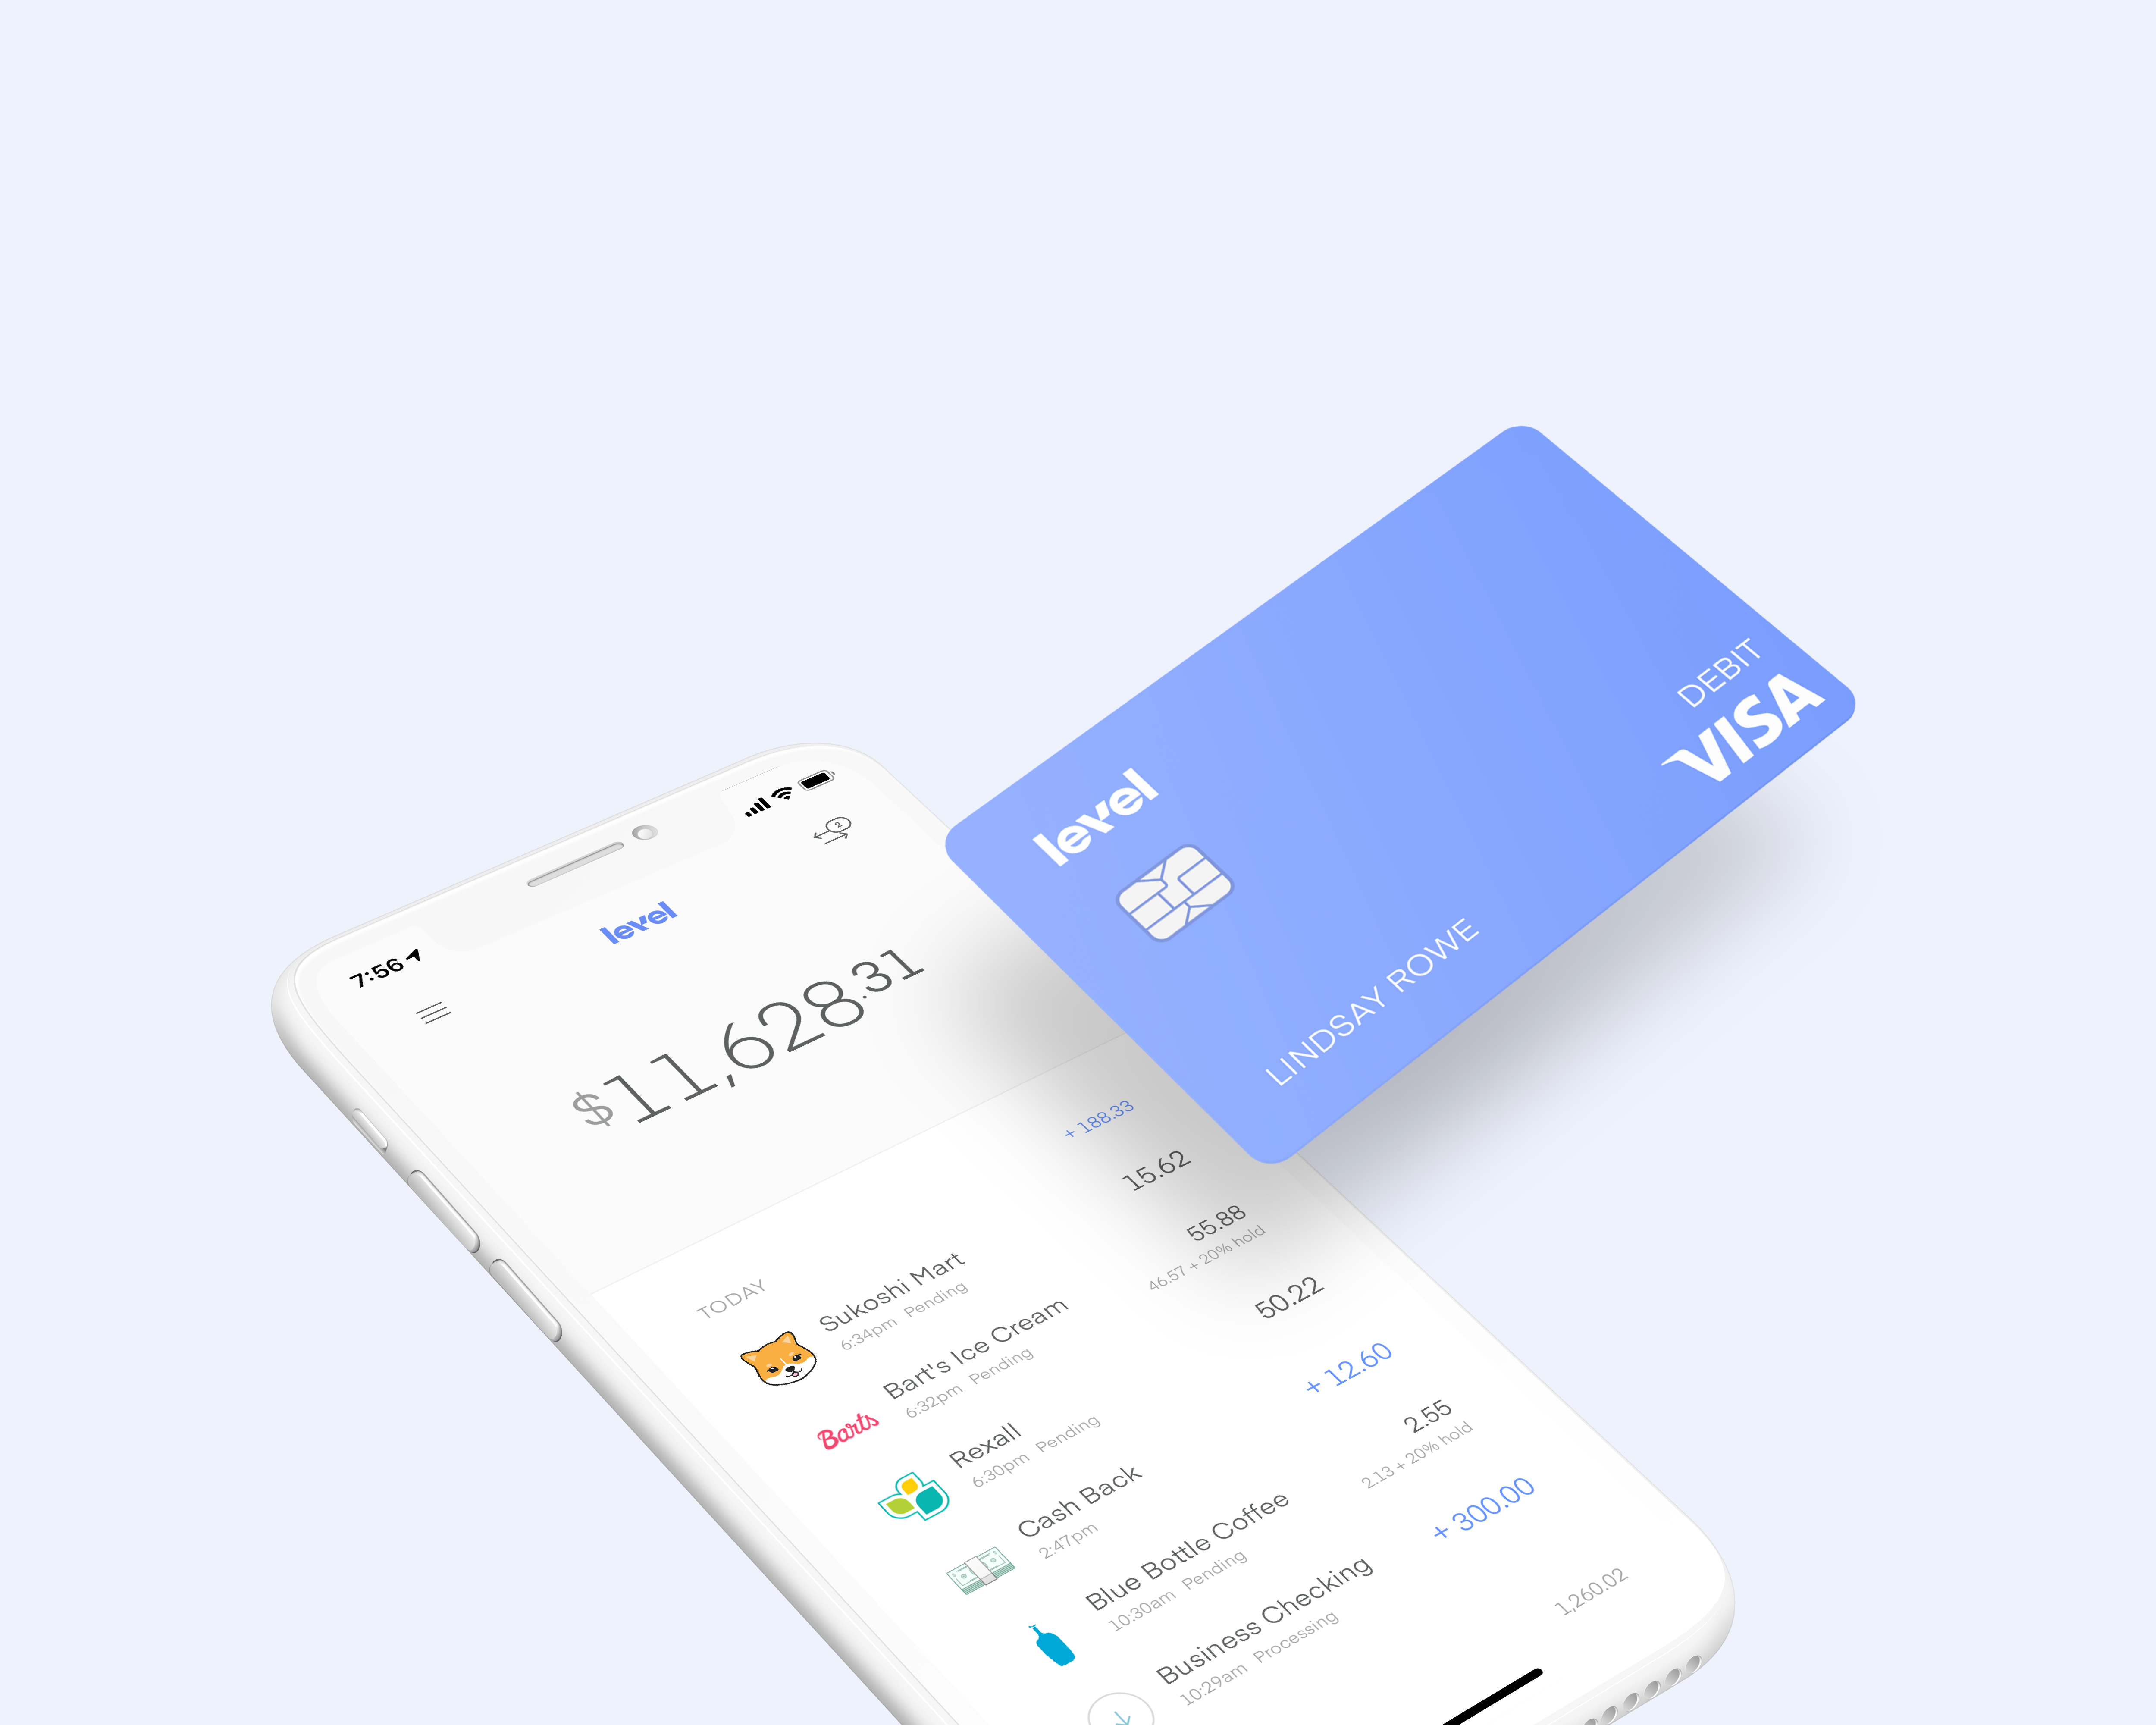 Level Launches A Mobile Banking App Offering 1 Cash Back On Debit